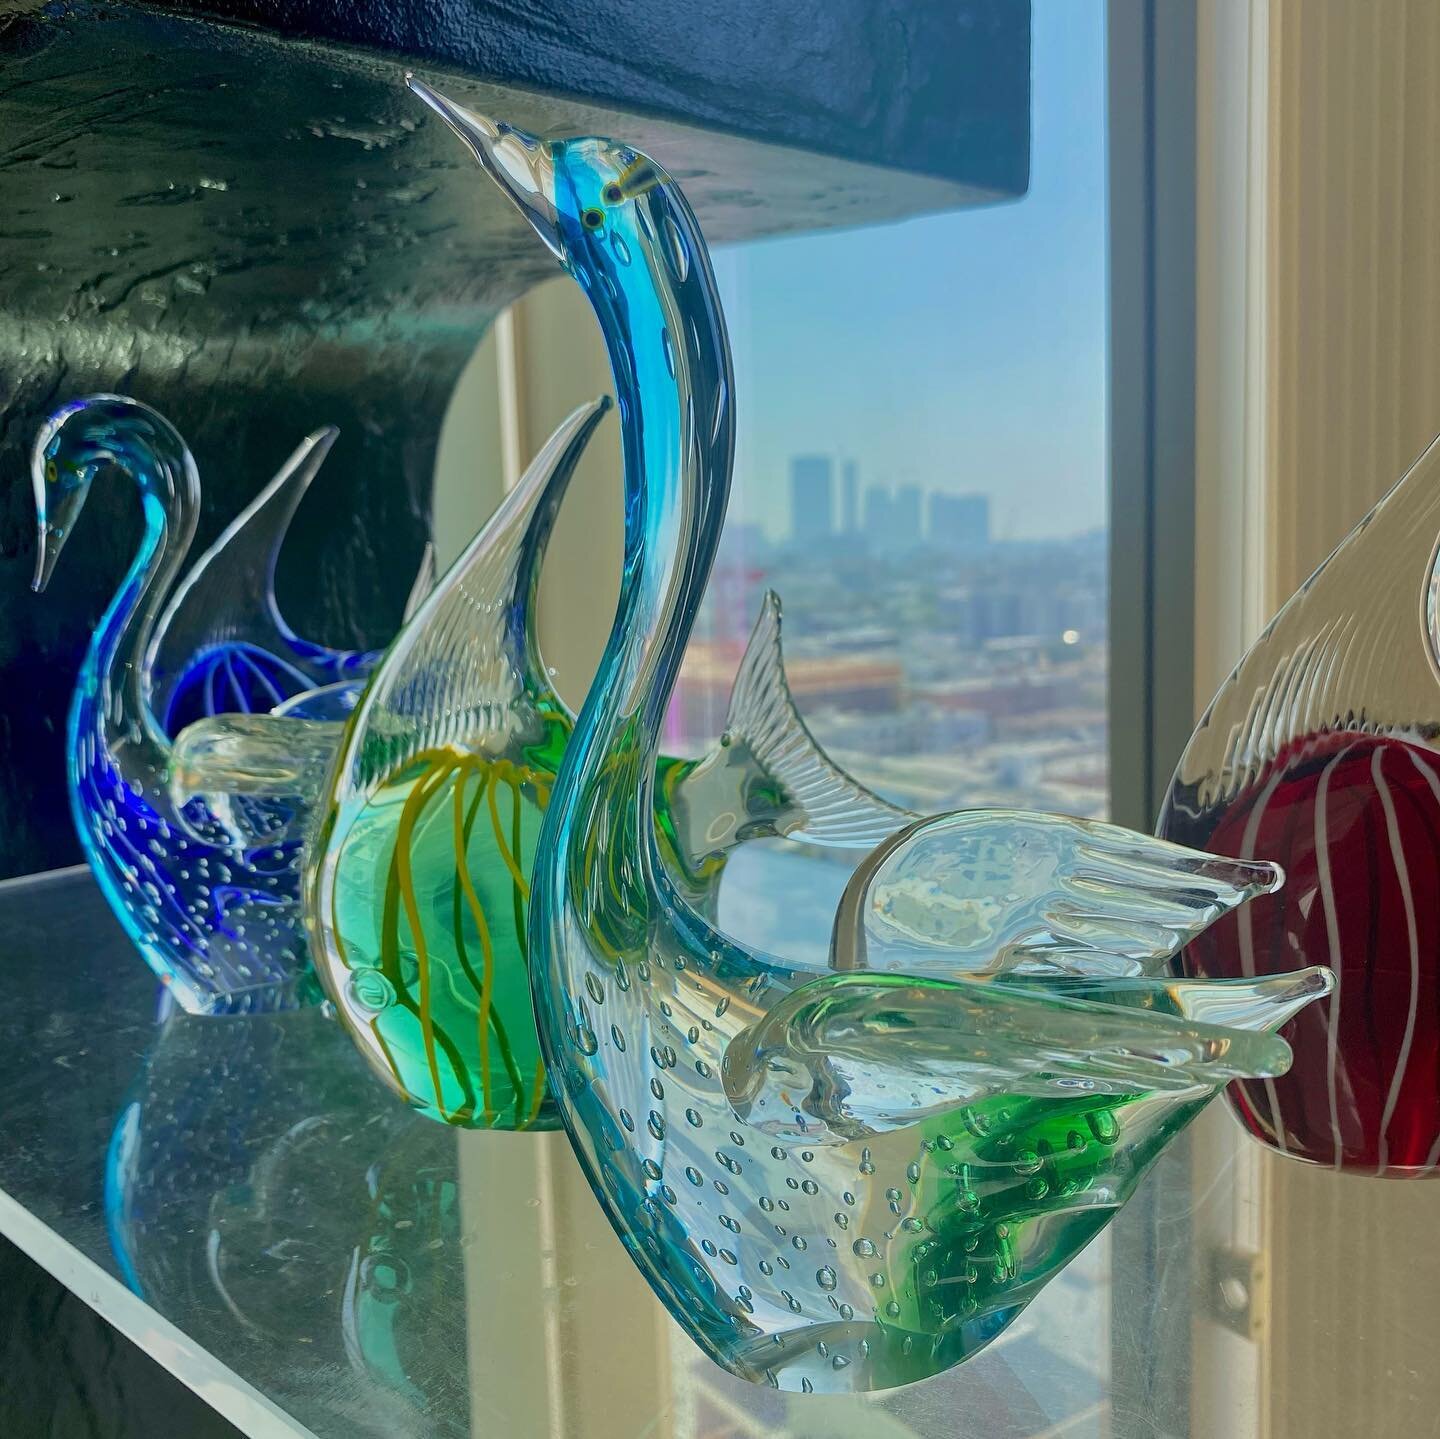 Beautiful Murano glass sculptures. Place these beauties near some sunlight and enjoy all the colors shining through! $60 each or dm for a bundle deal💕

Available for pickup or delivery for a fee 

#murano #muranoglass #muranoisland #venice #muranos 